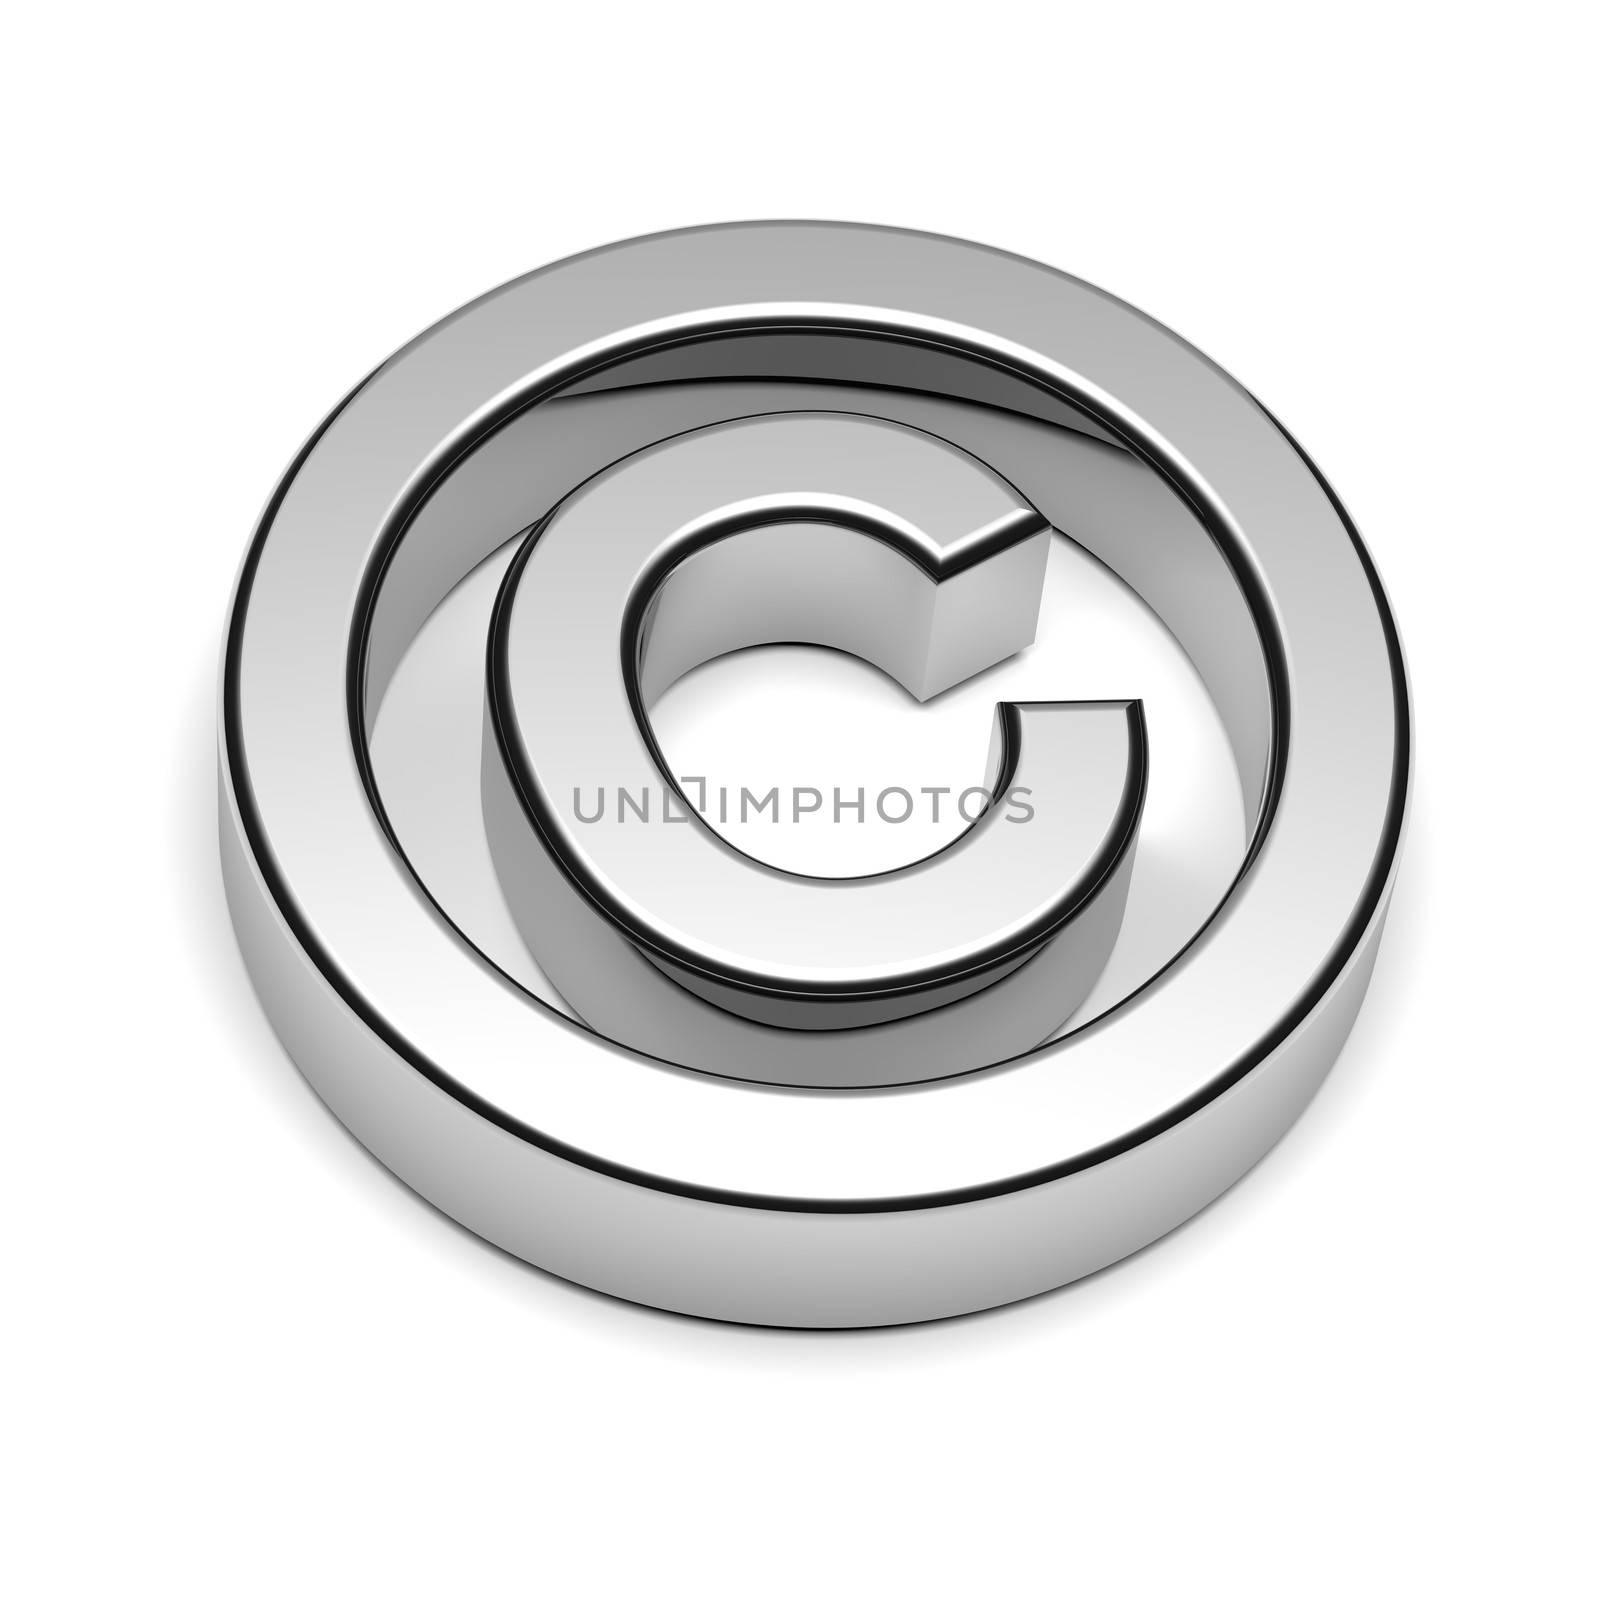 Copyright Chrome Sign by make